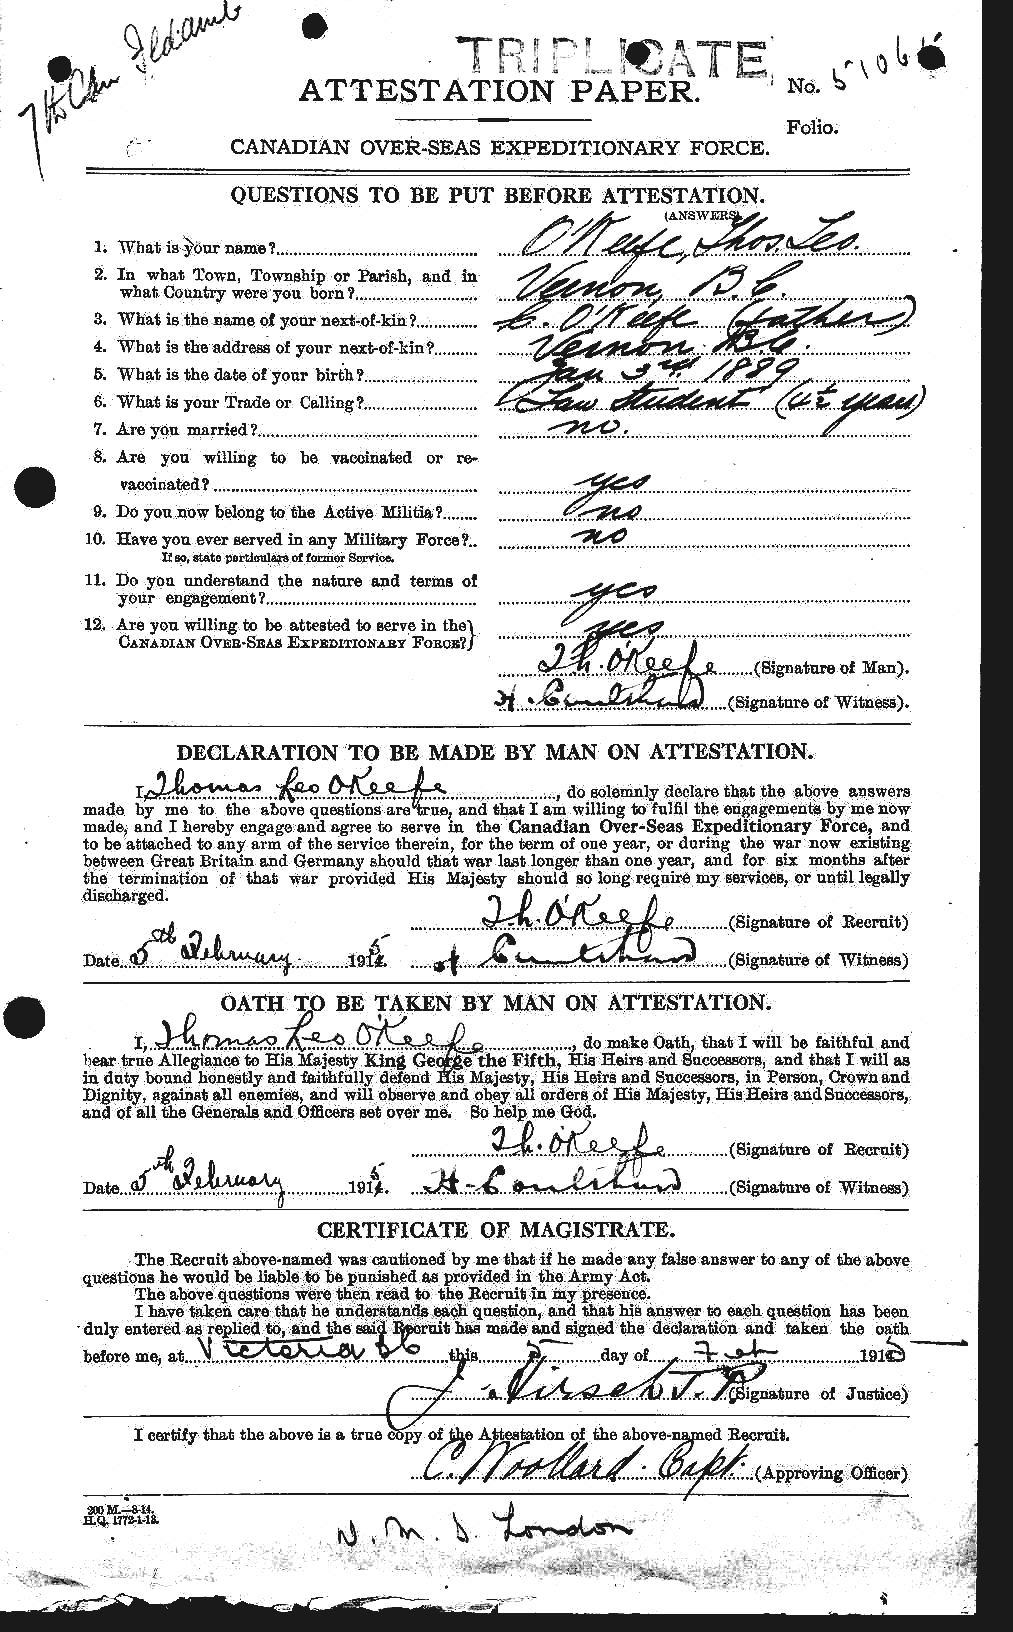 Personnel Records of the First World War - CEF 556352a